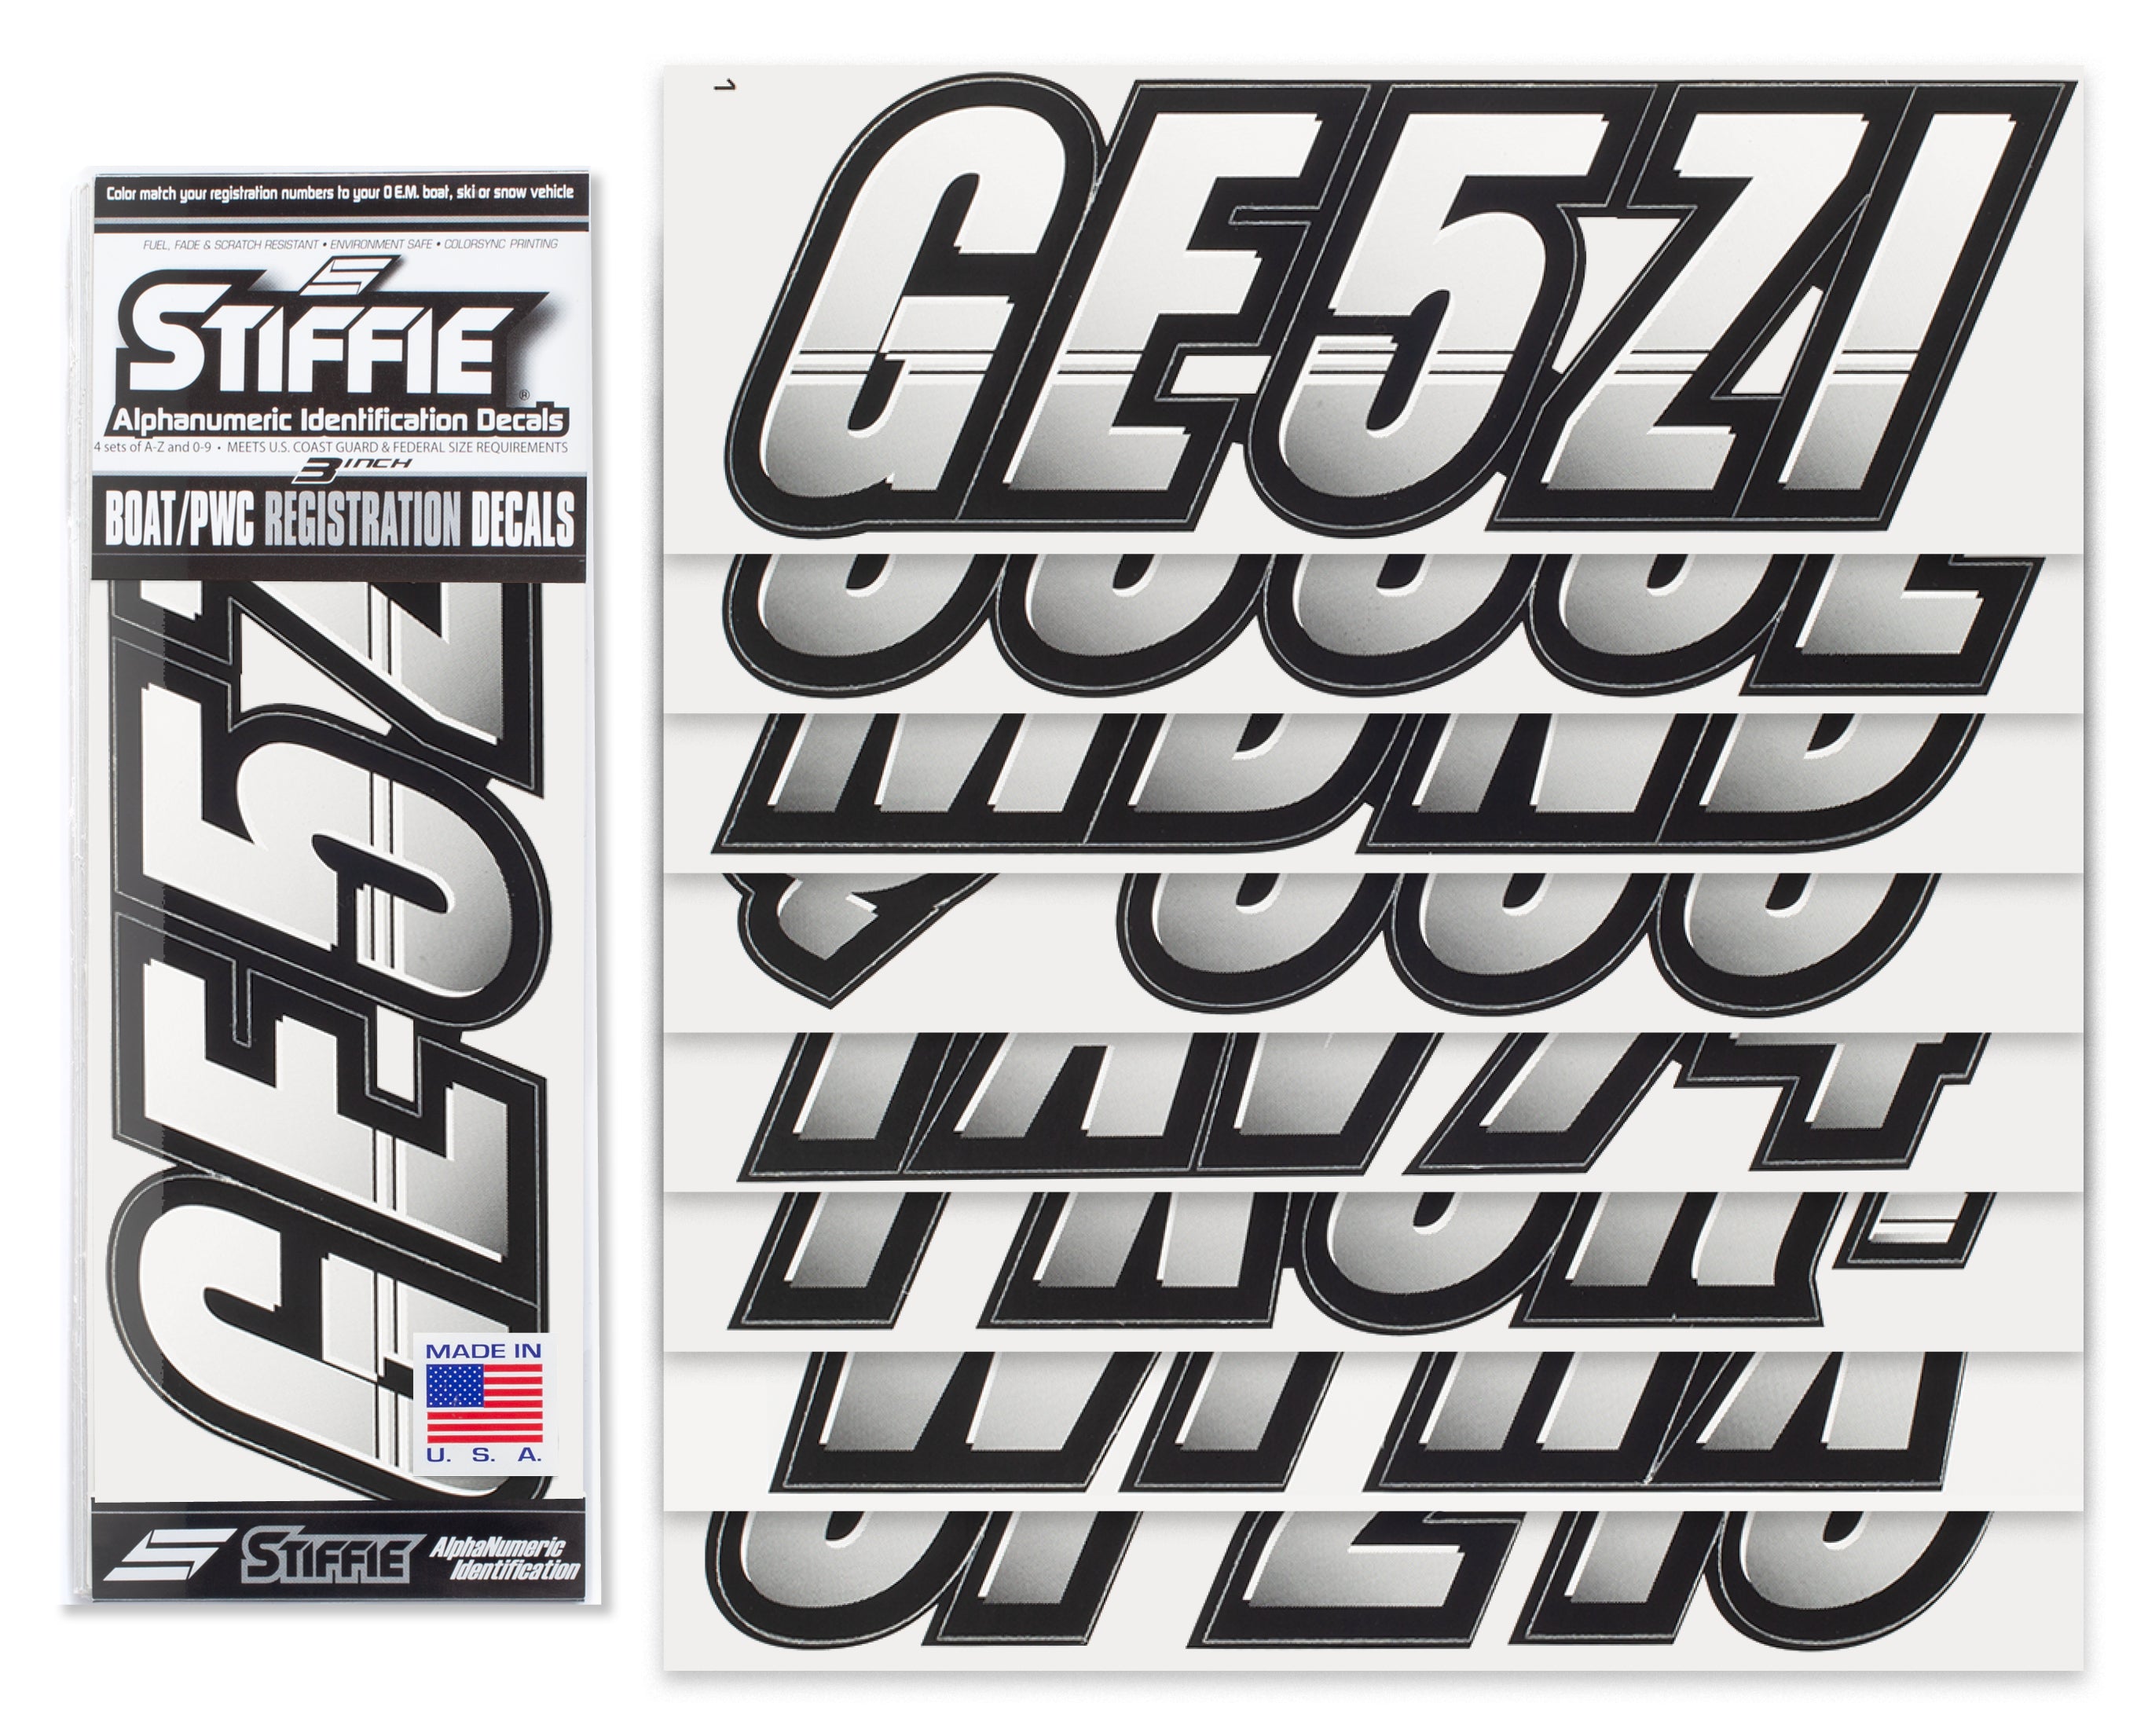 STIFFIE Techtron White/Black 3" Alpha-Numeric Registration Identification Numbers Stickers Decals for Boats & Personal Watercraft